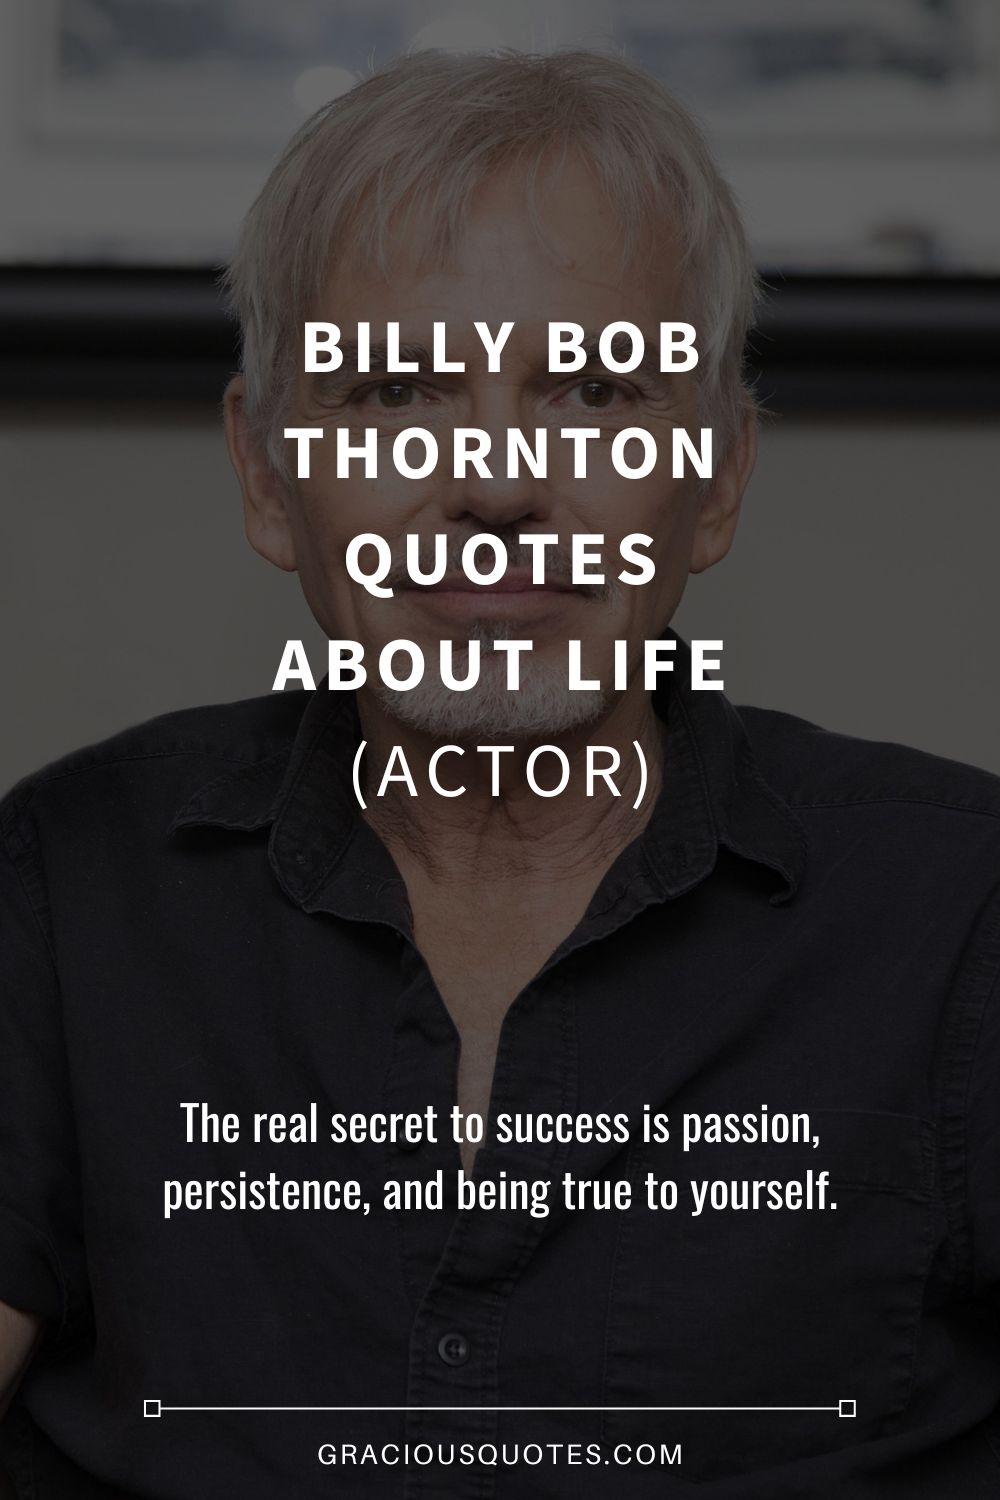 Billy Bob Thornton Quotes About Life (ACTOR) - Gracious Quotes